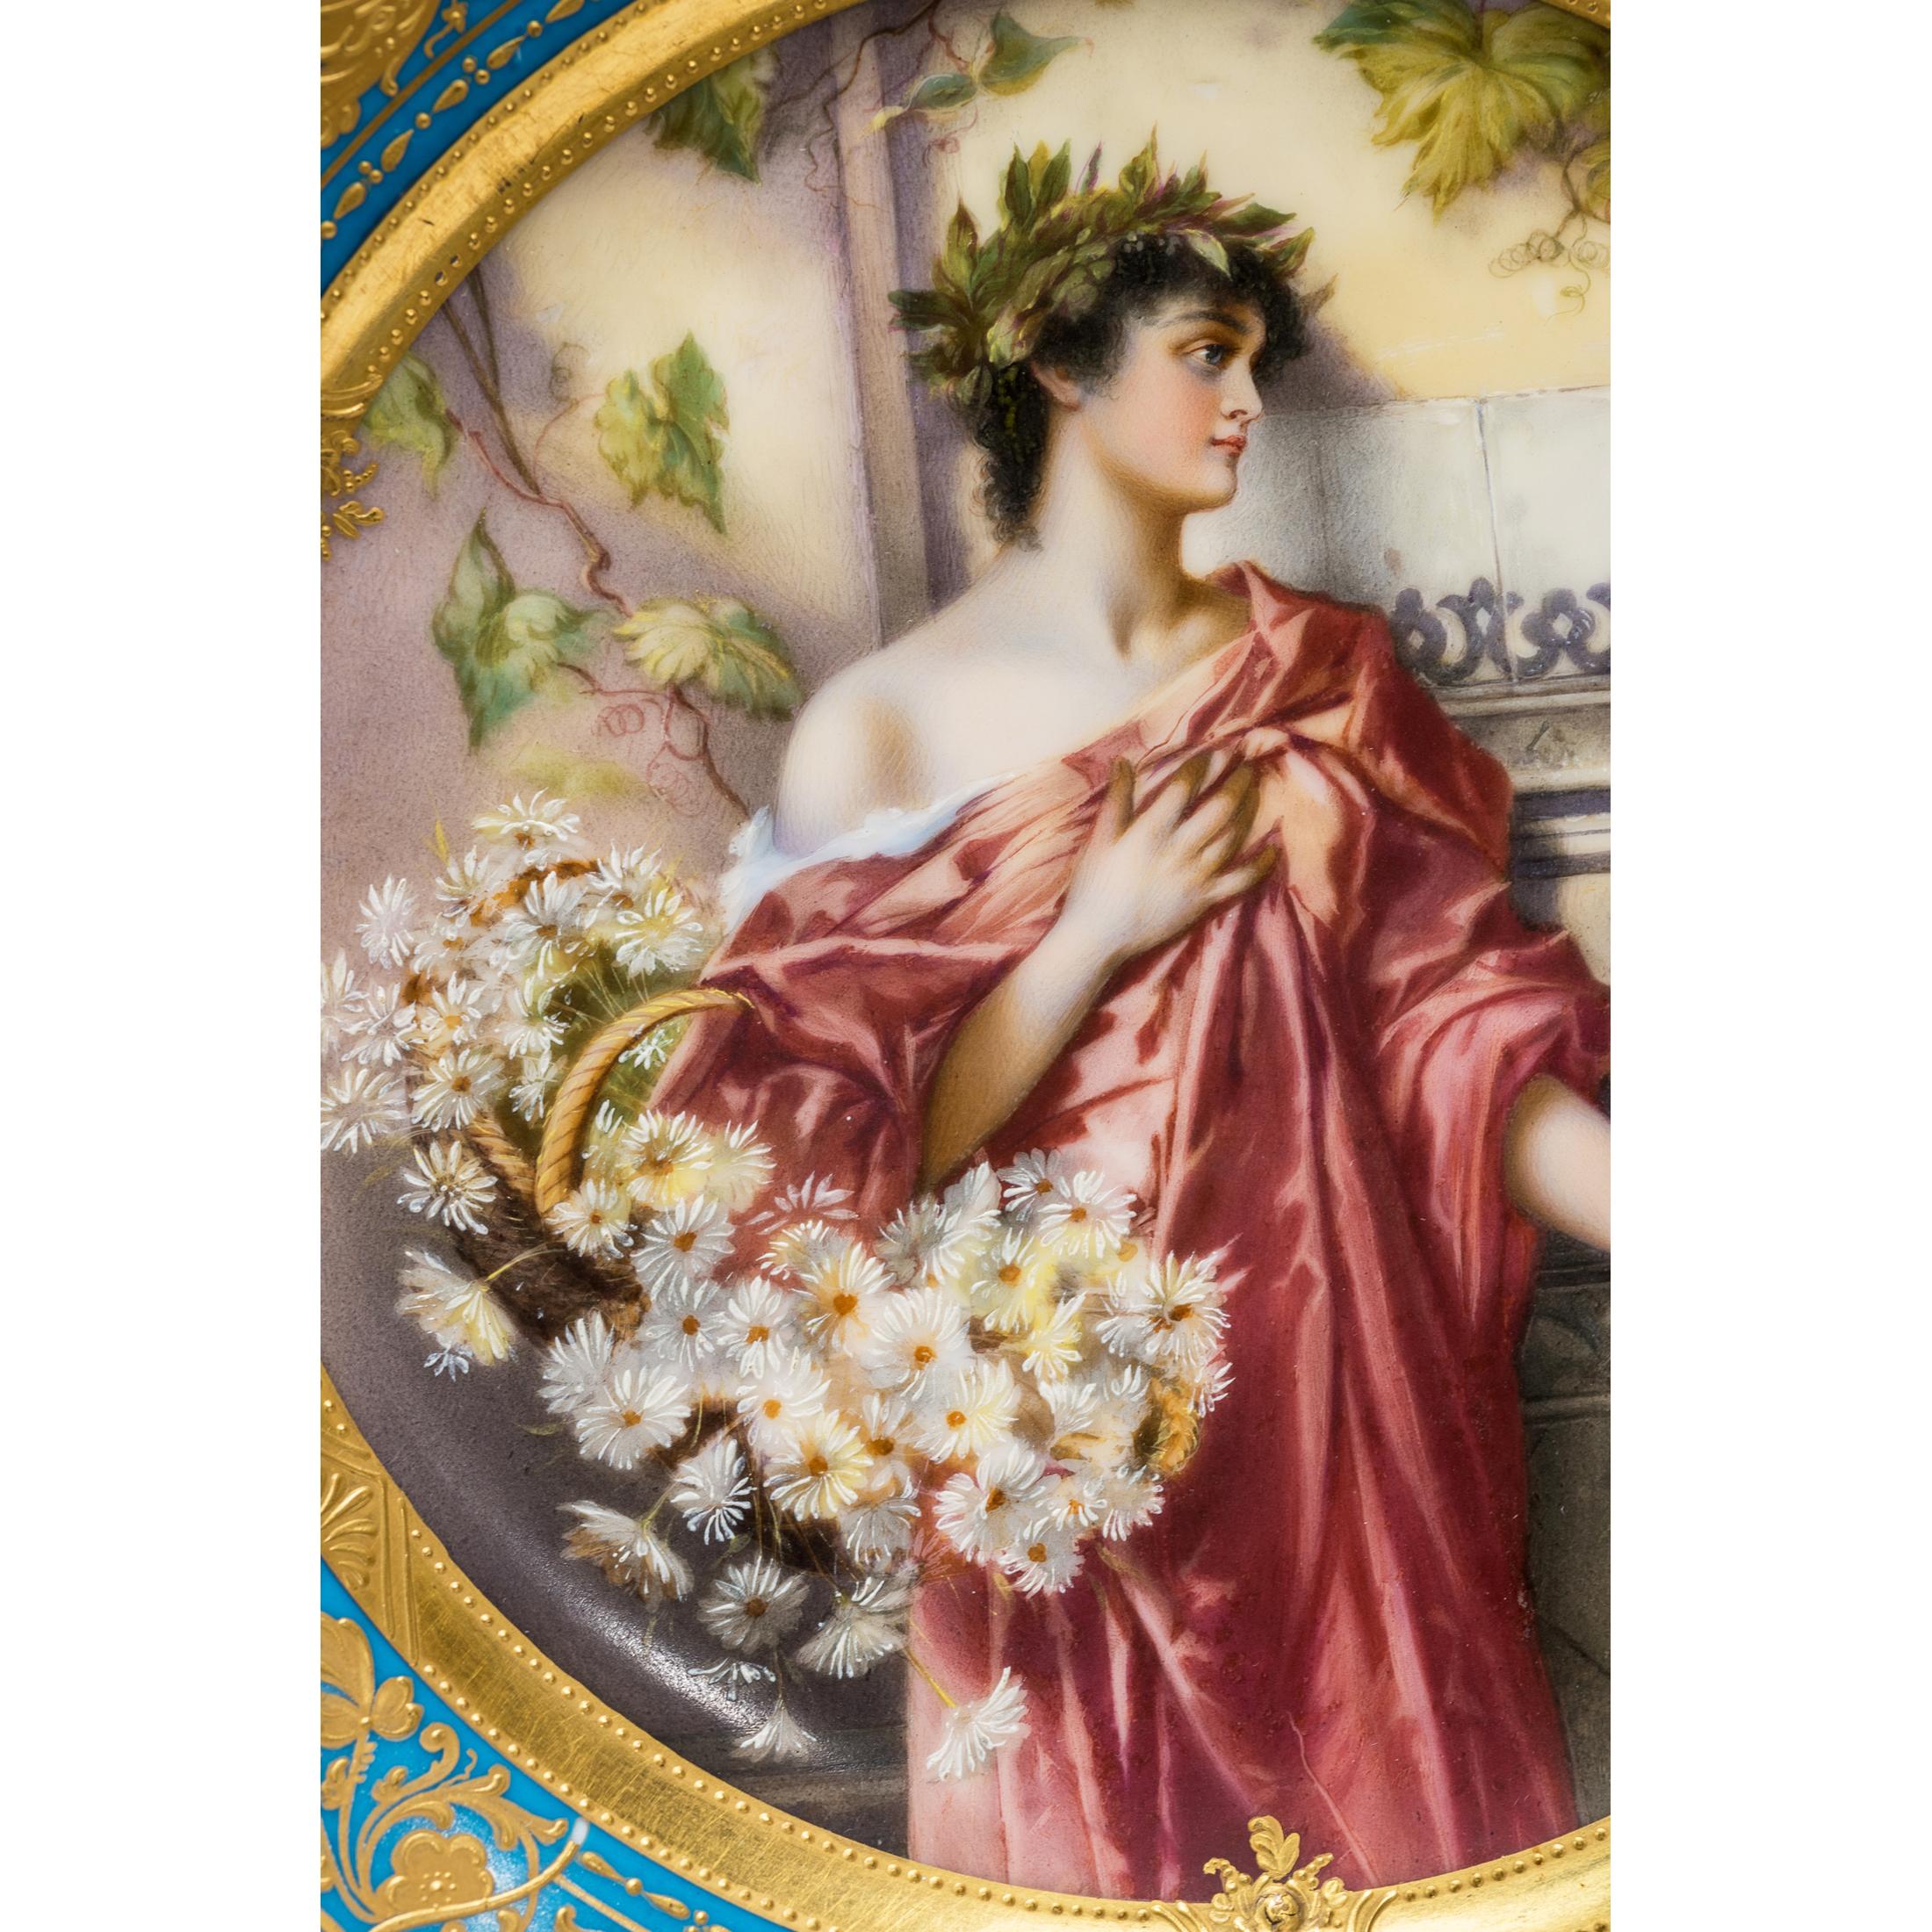 Exquisite Royal Vienna portrait porcelain gilded cabinet plate featuring hand-painted portrait of a beautiful young Grecian woman with a basket of flowers. The turquoise border finished with gold trim. Marked on verso with the Royal Vienna Blue